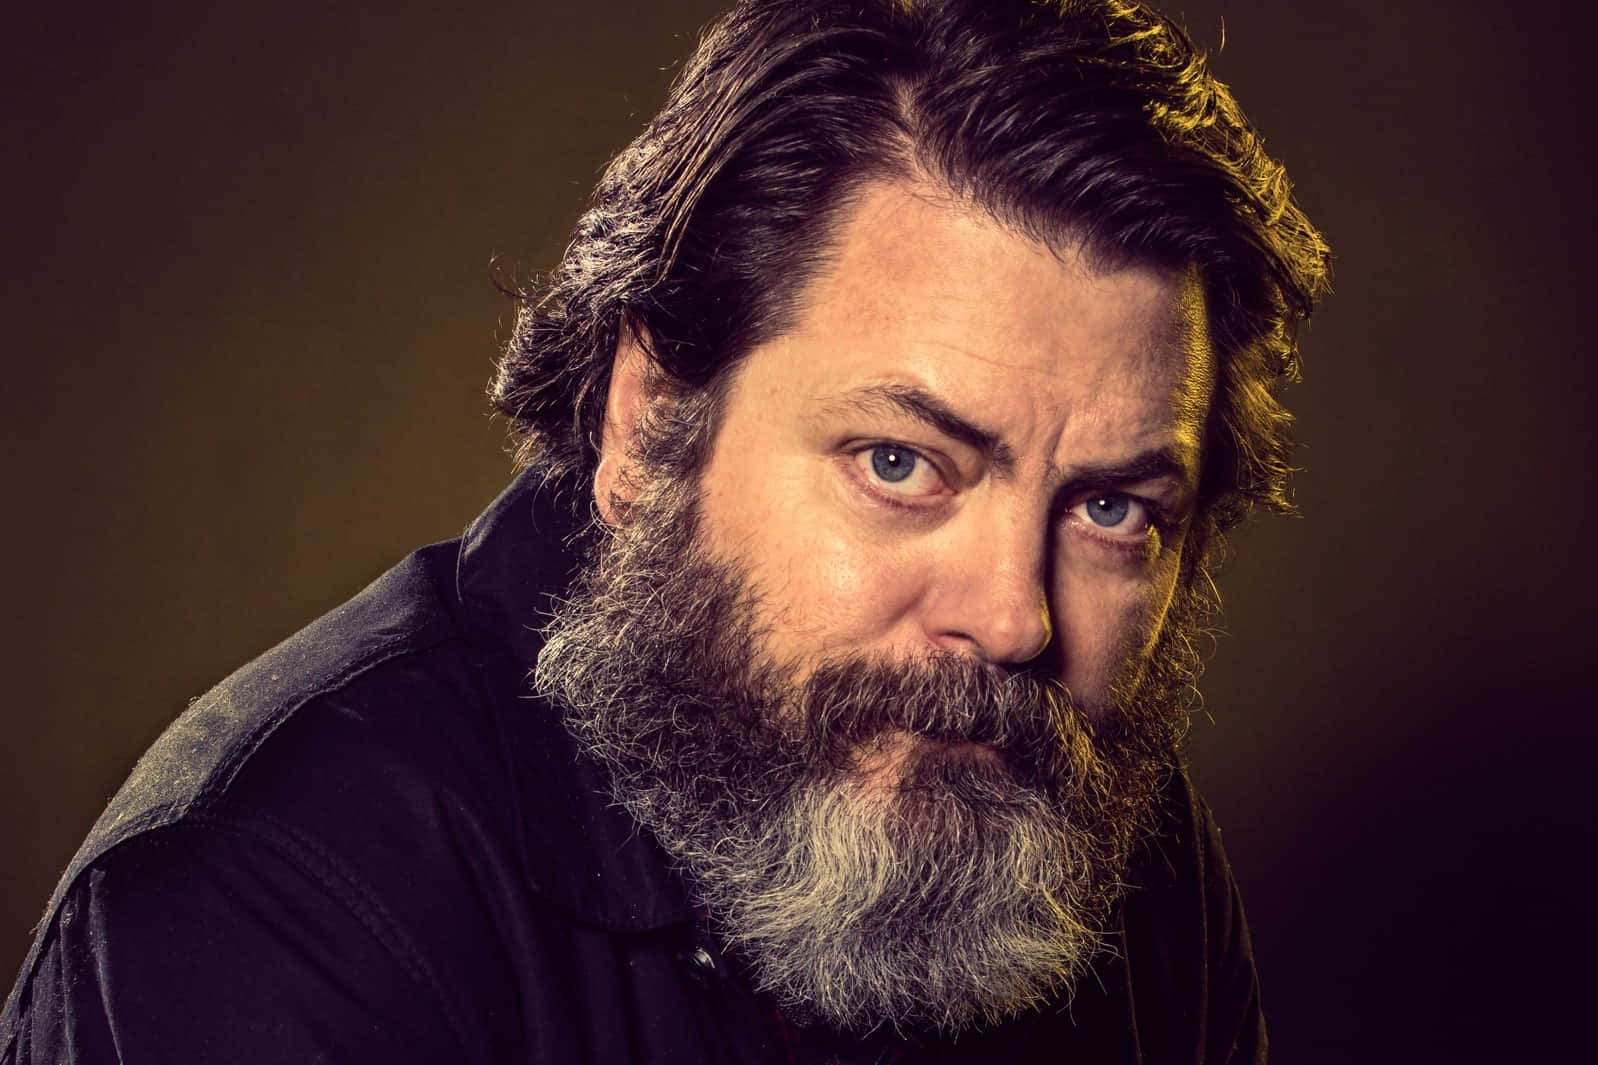 Nick Offerman Enjoying A Cup Of Coffee Background